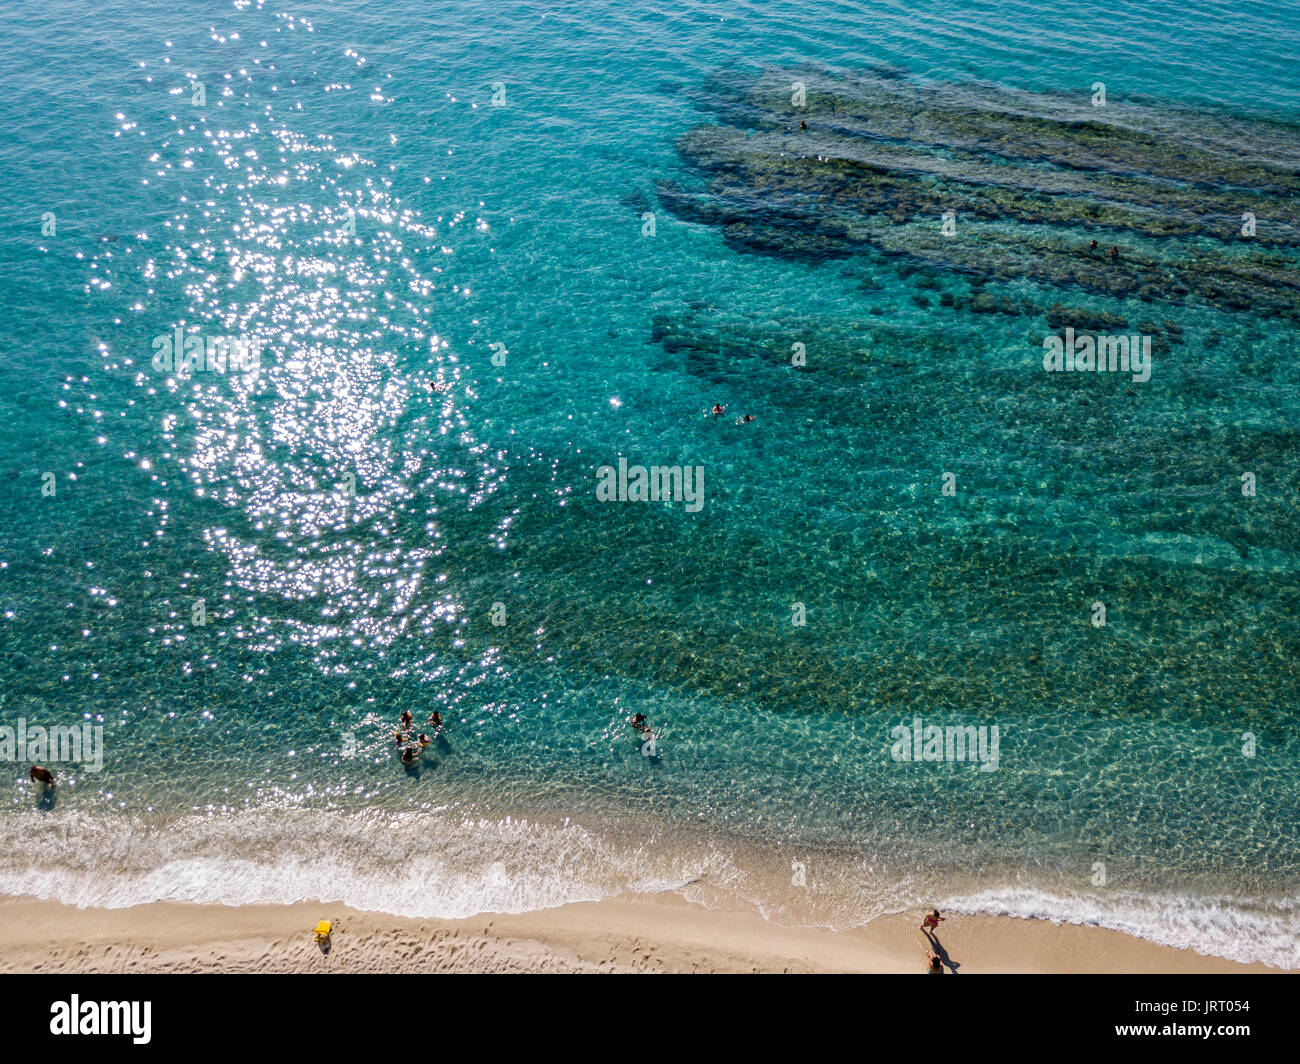 Aerial view of rocks on the sea. Overview of seabed seen from above ...